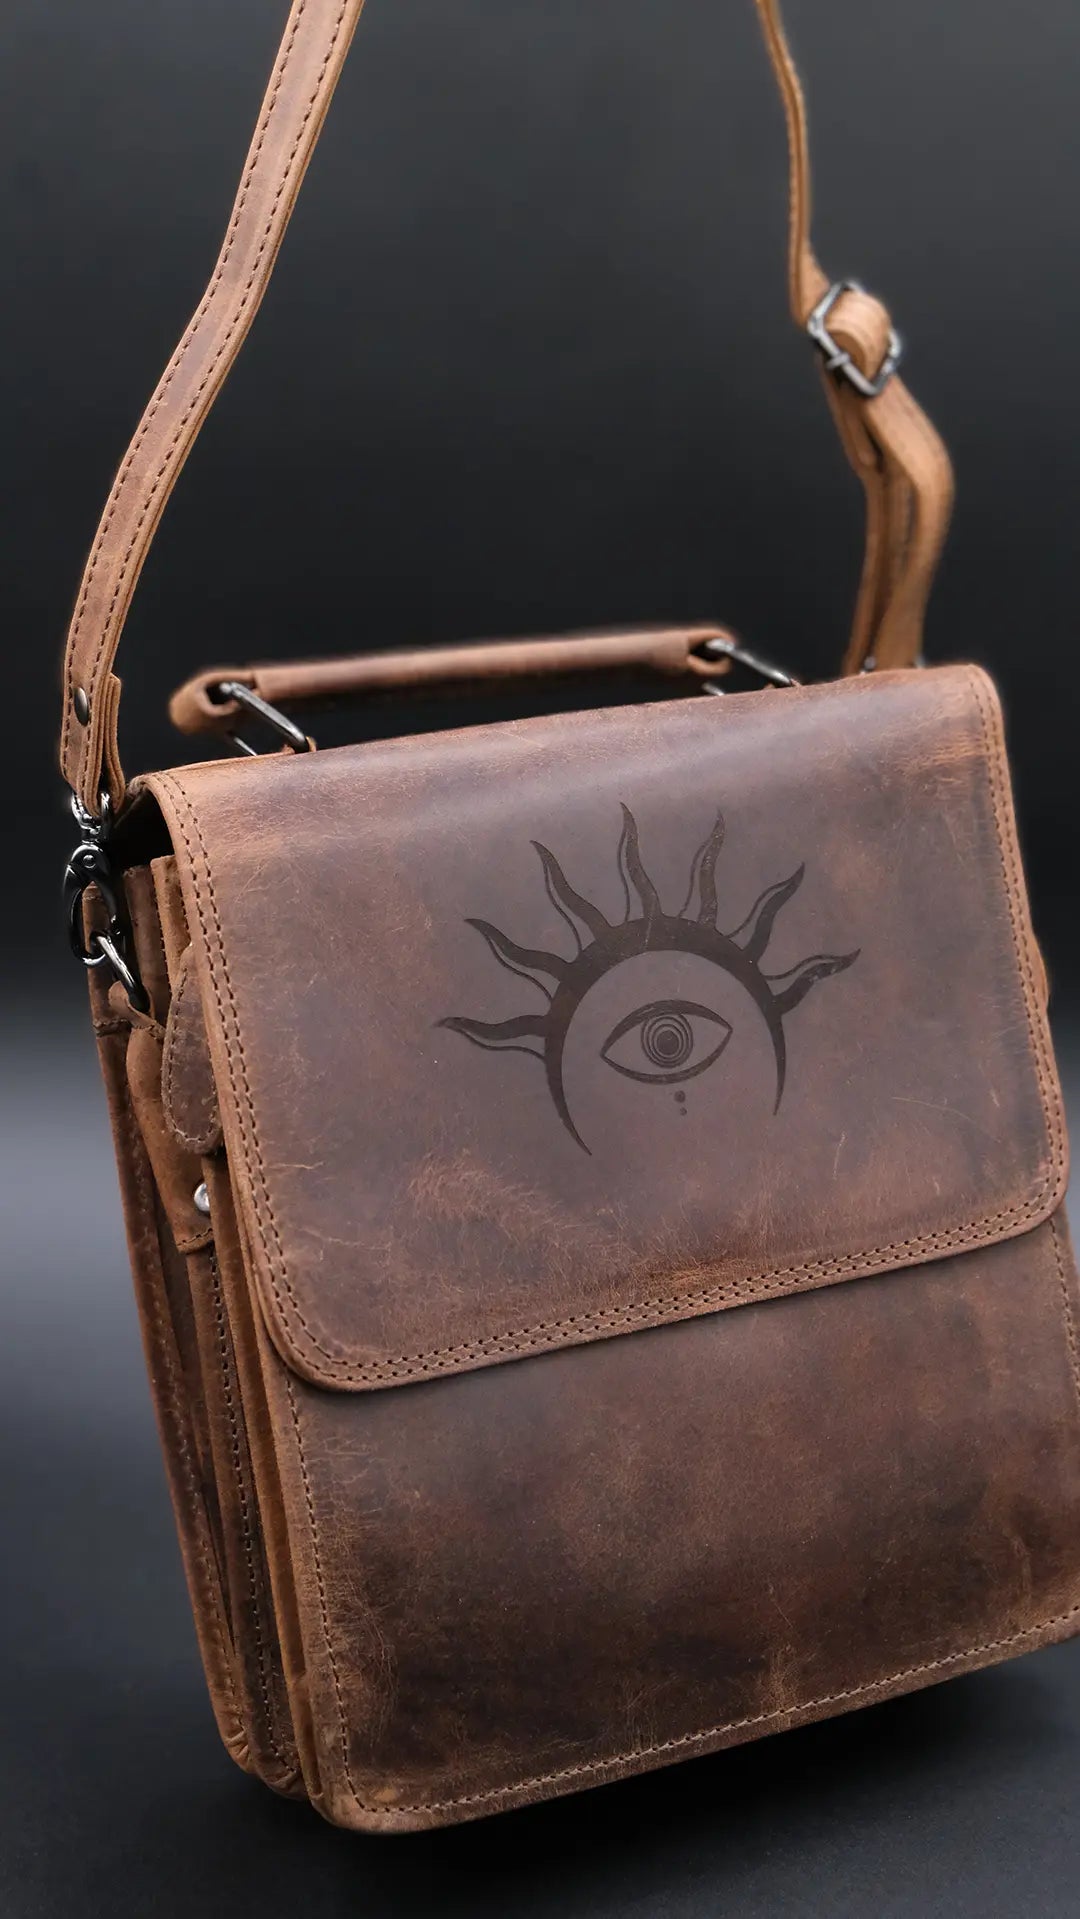 A Shoulder bag in light brown leather with solar crown symbol engraved on the black background.